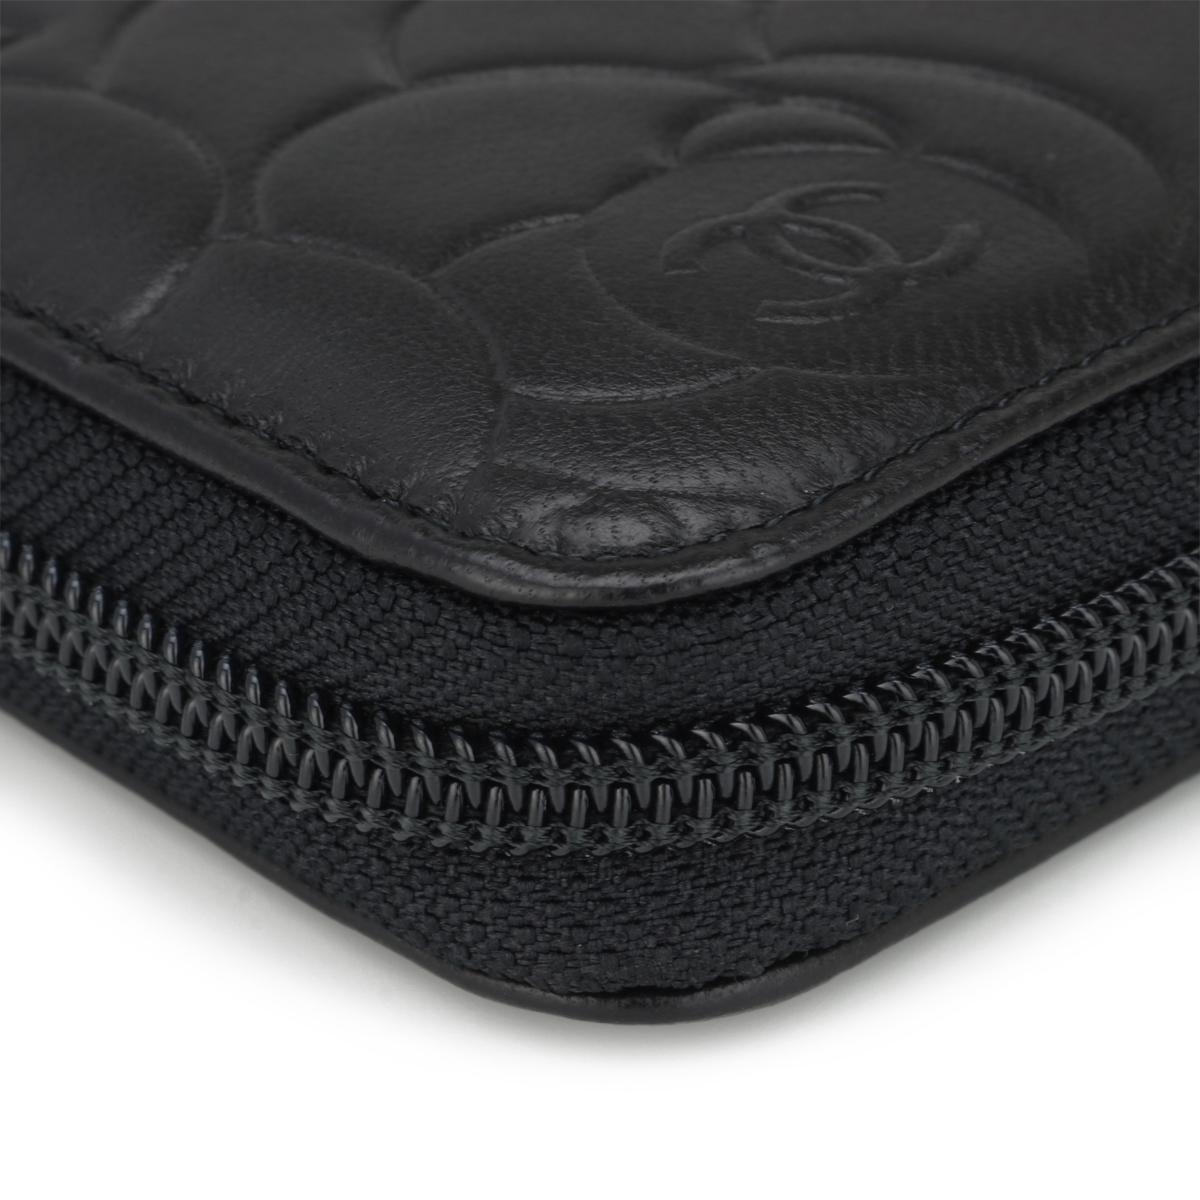 Chanel Camellia Long Zipped Wallet in Black Lambskin with Silver Hardware 2013 10